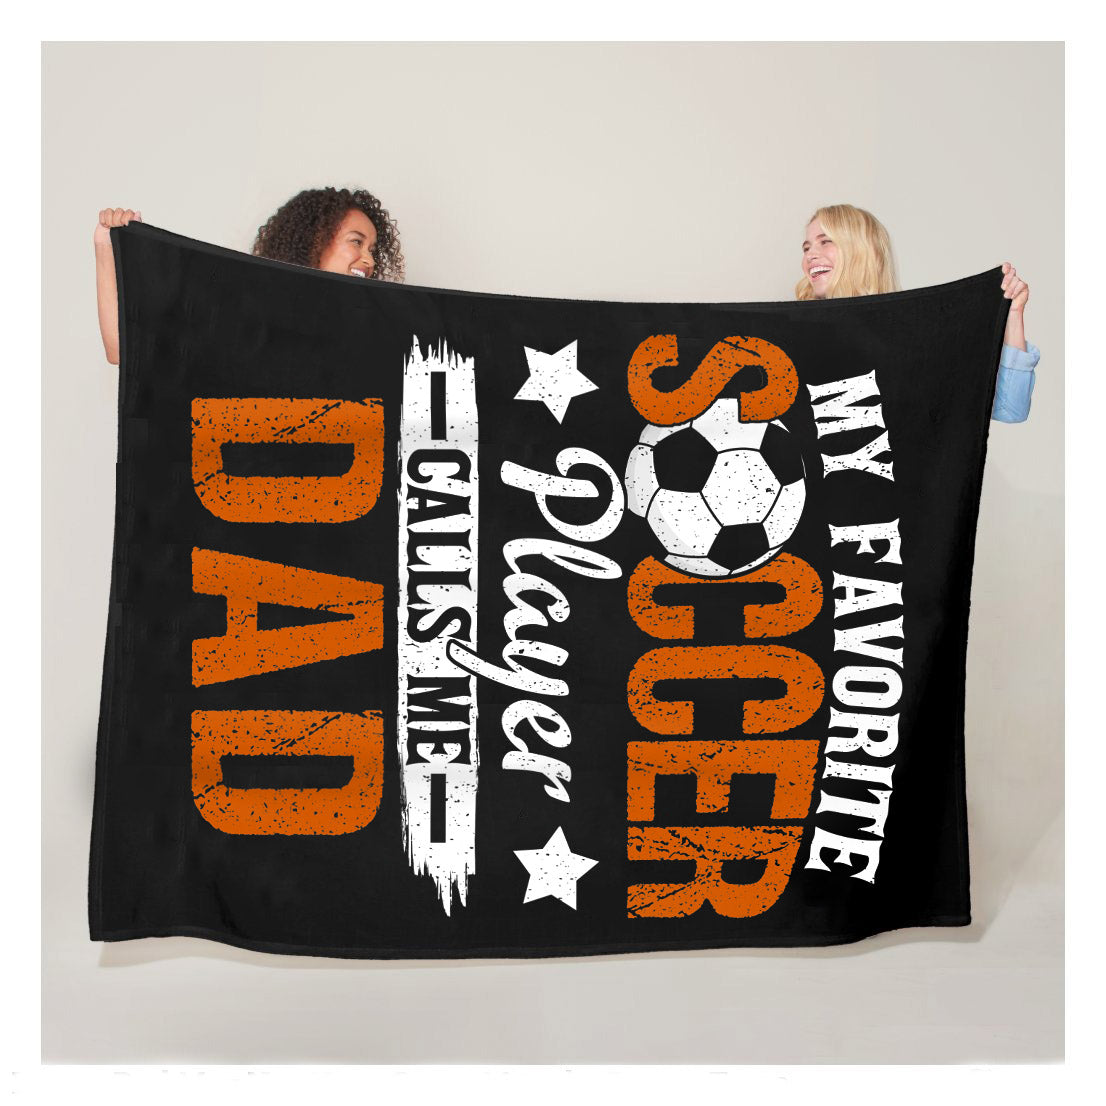 My Favorite Soccer Player Calls Me Dad Fathers Day Fleece Blanket,  Soccer Blankets, Soccer Gifts, Happy Fathers Day Gift Ideas For Dad